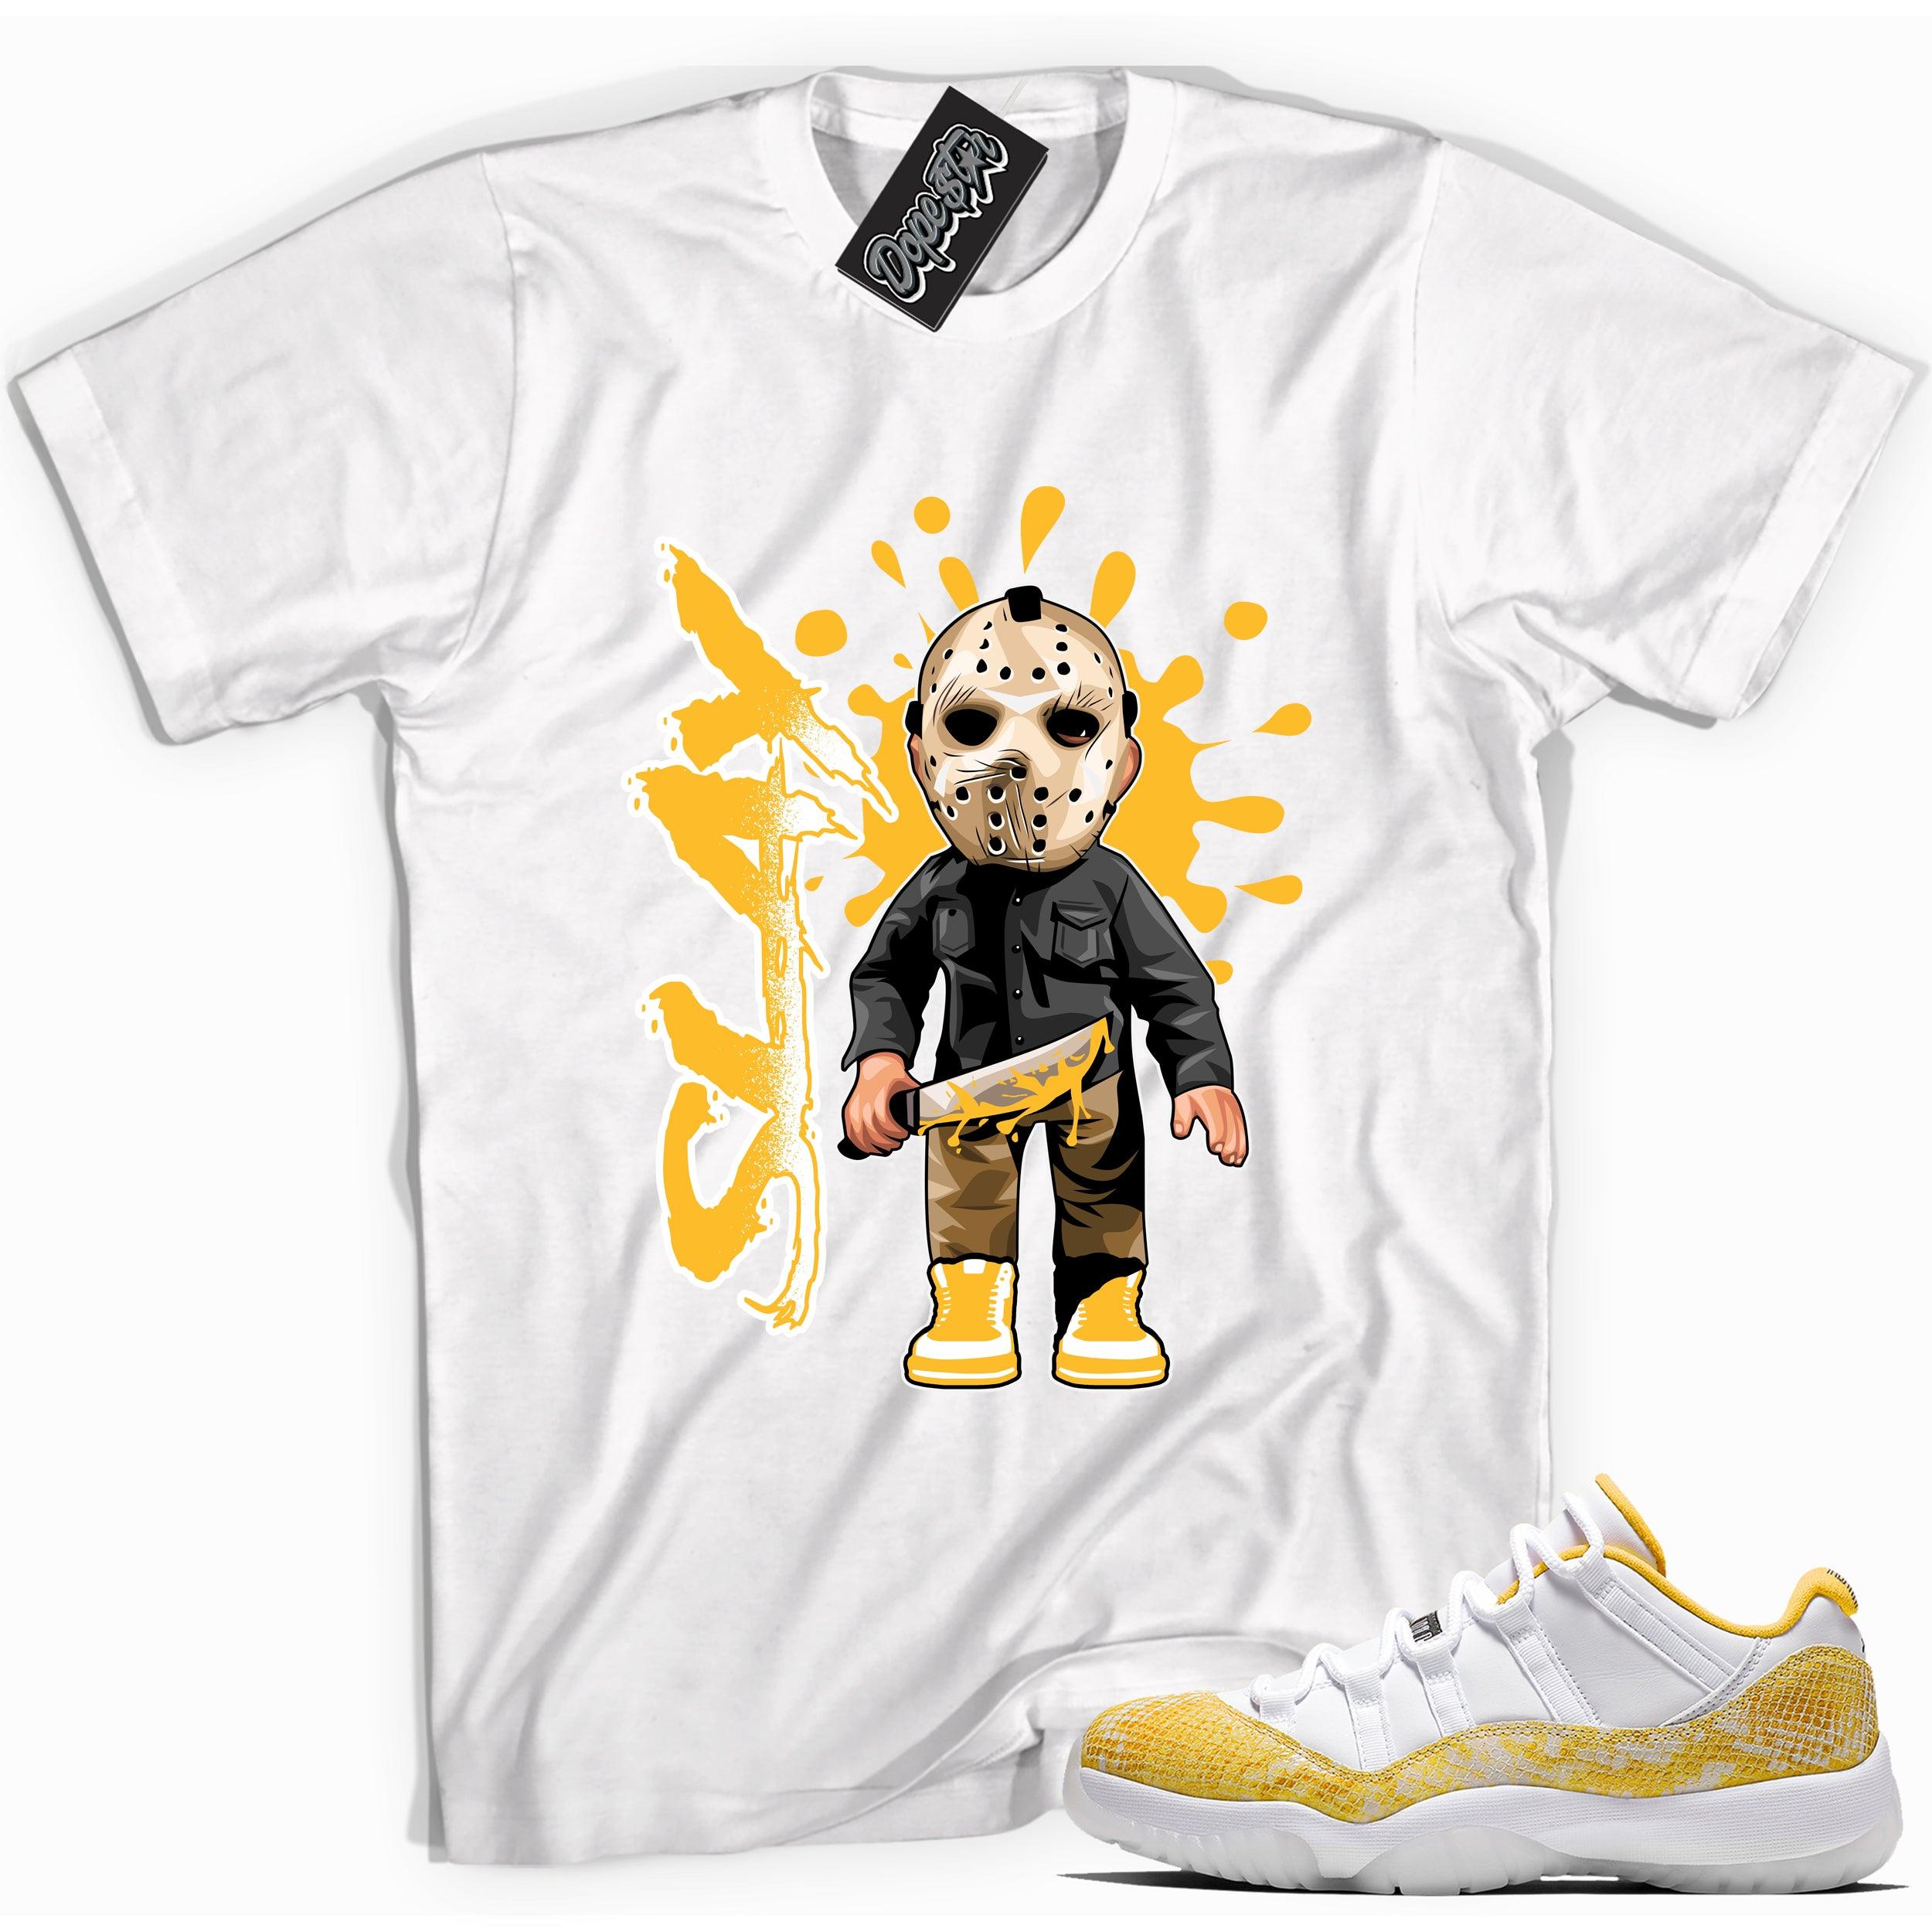 Cool white graphic tee with 'slay' print, that perfectly matches Air Jordan 11 Retro Low Yellow Snakeskin sneakers